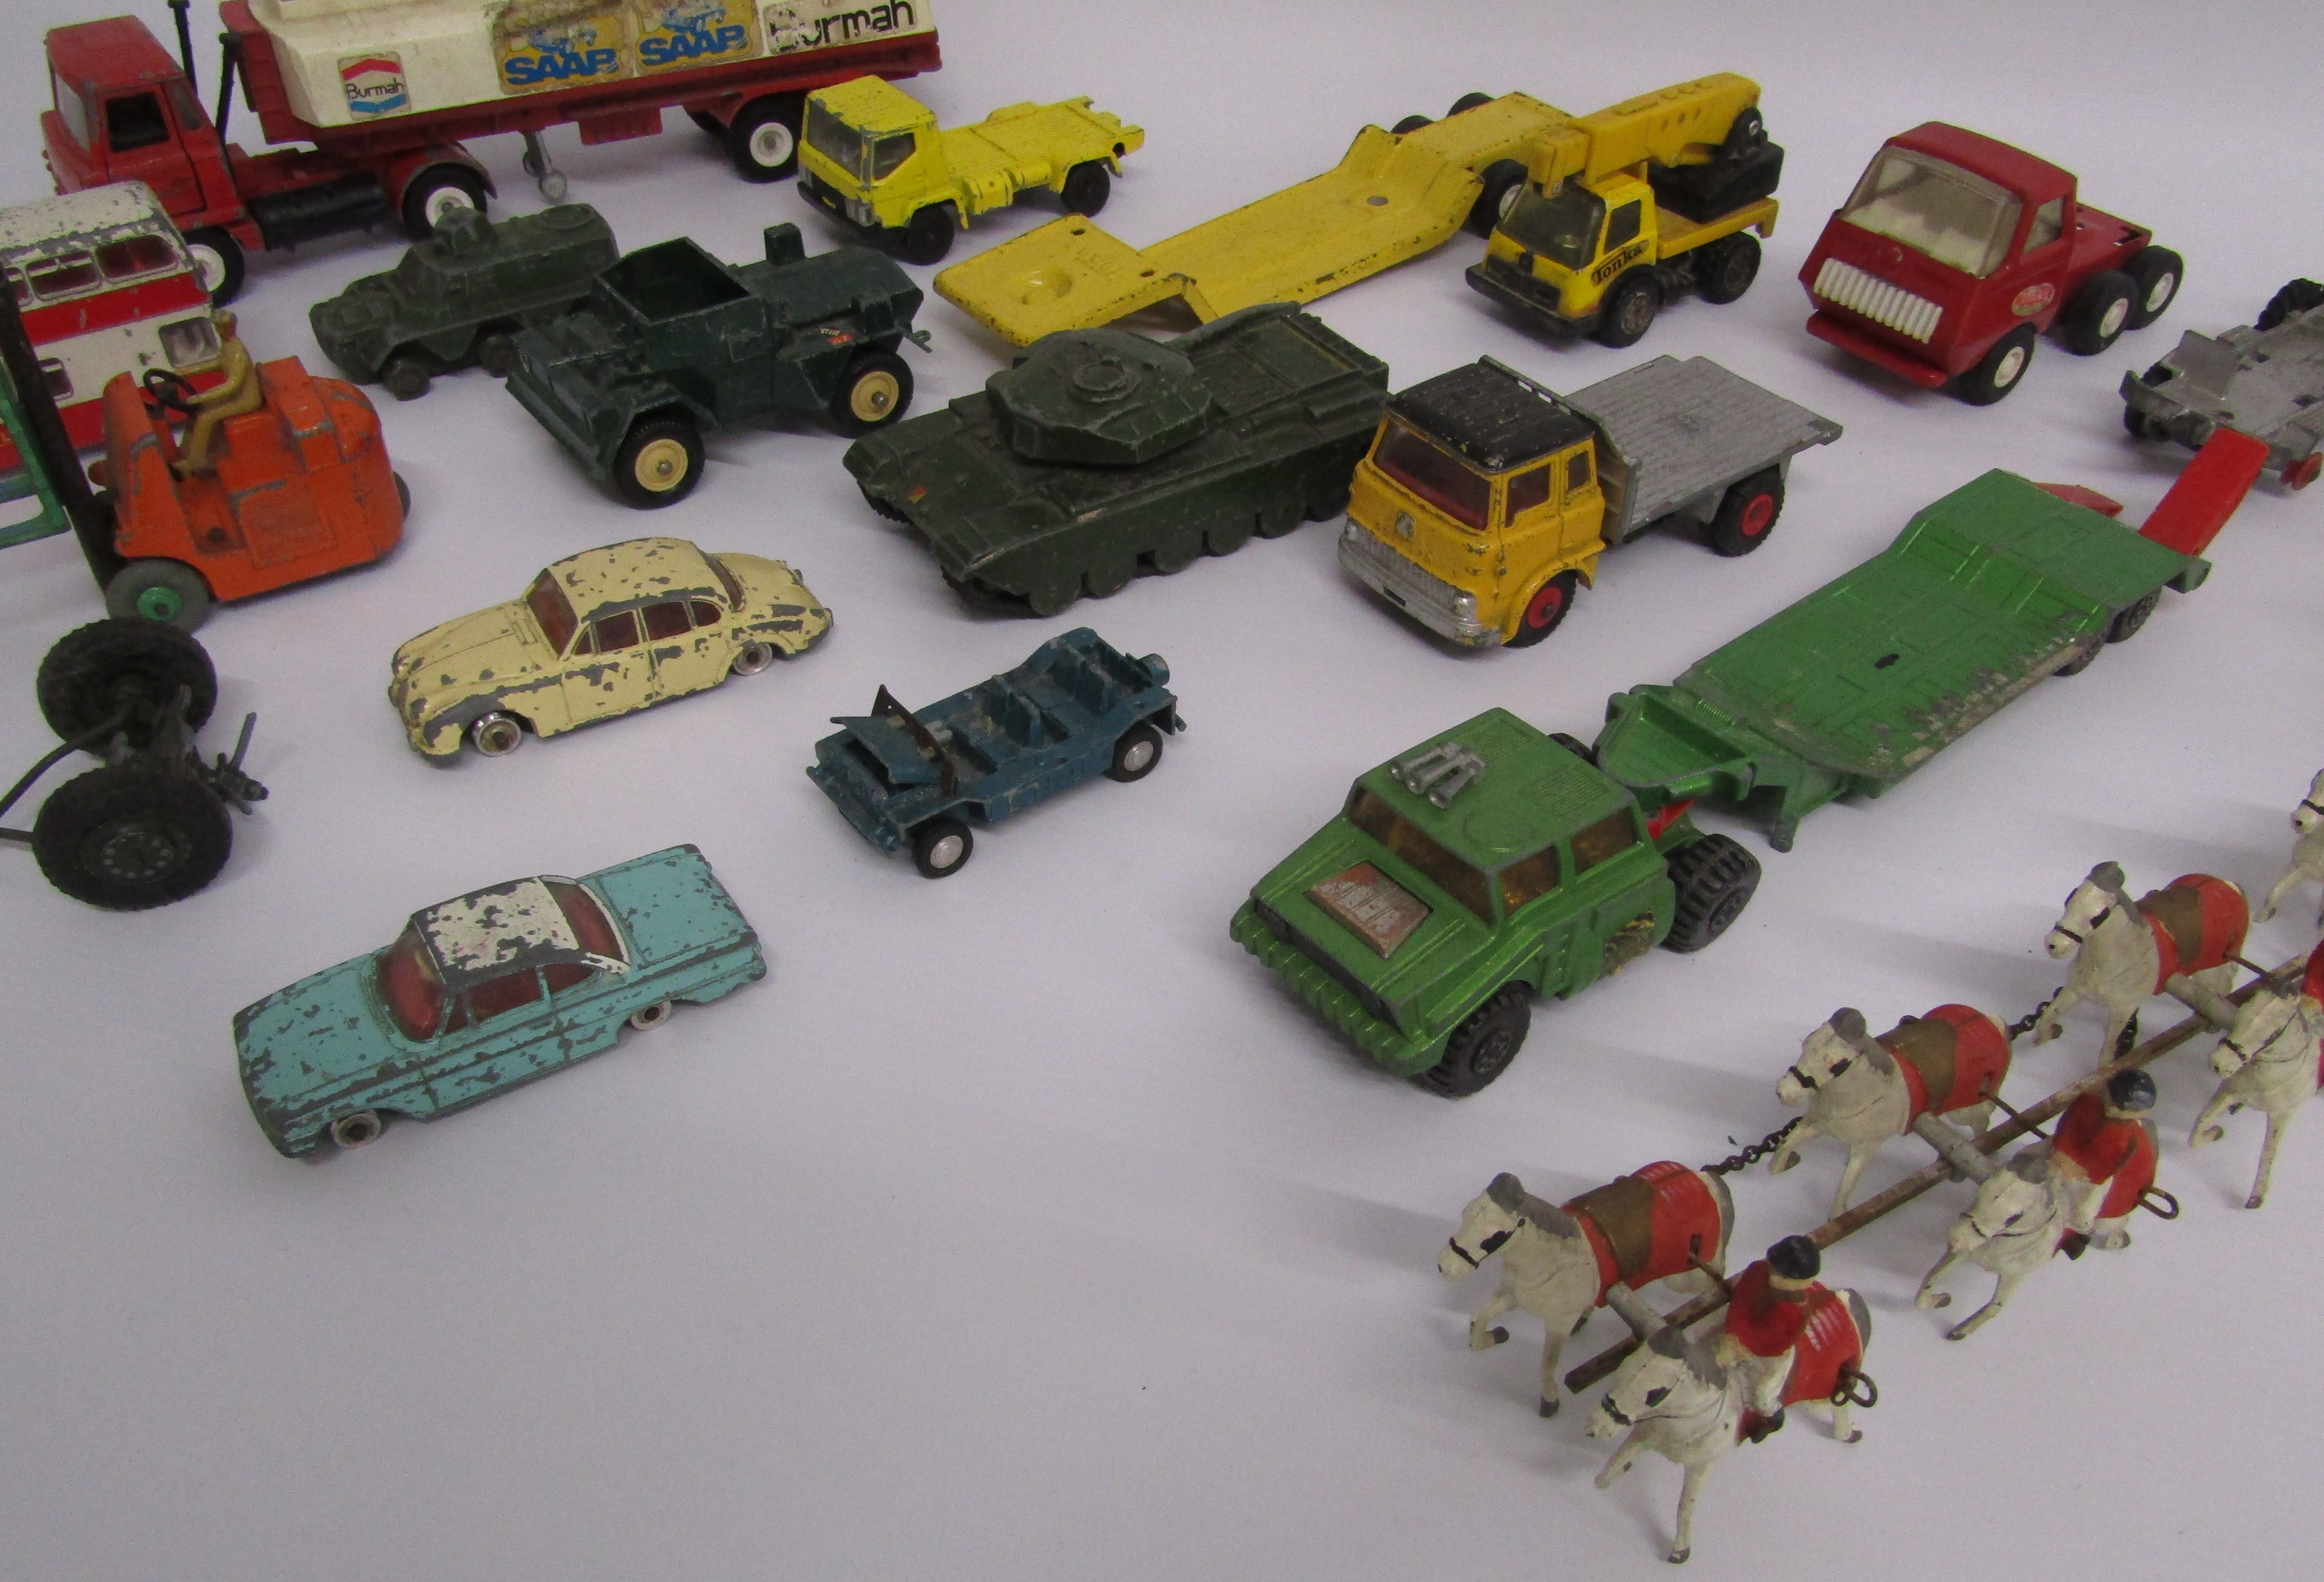 Diecast vehicles includes Dinky, Britains Daimler Scout car, a model of the Queens Carriage etc - Image 3 of 4